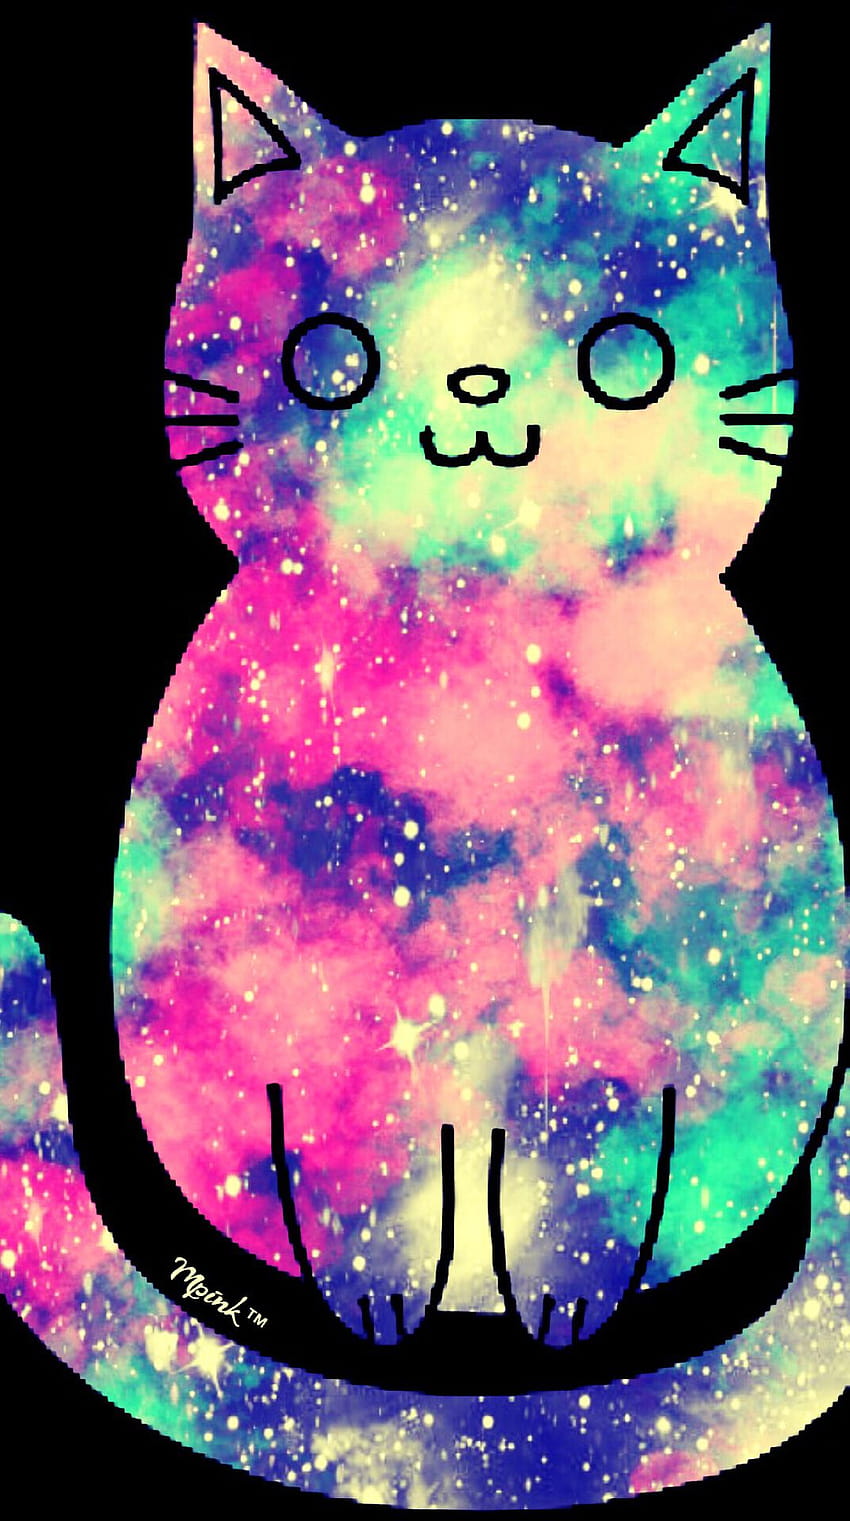 Galaxy Cat Wallpapers  Top Free Galaxy Cat Backgrounds  WallpaperAccess